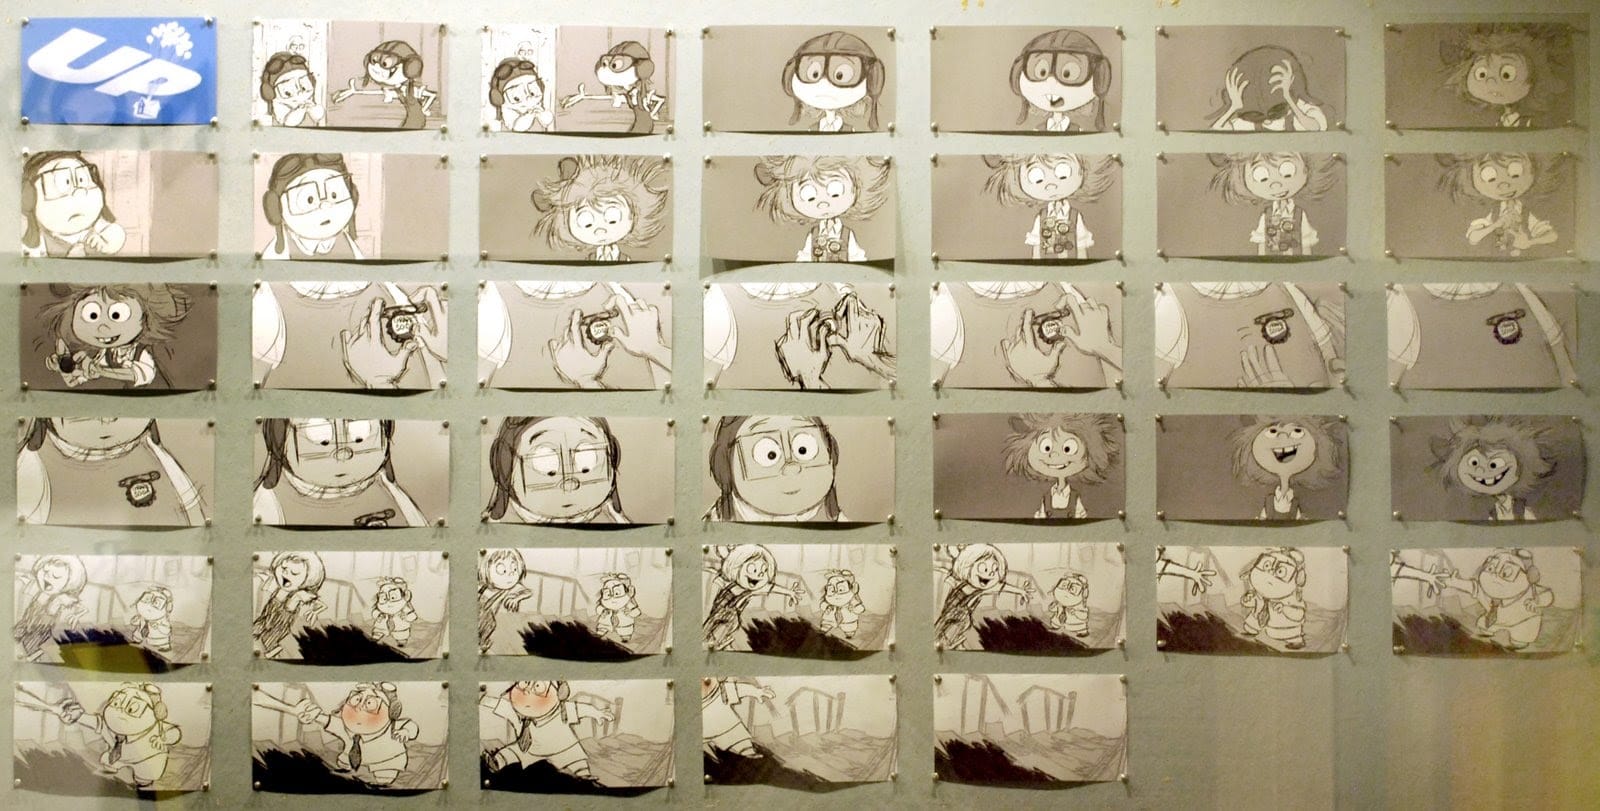 Storyboard of the different facial expressions and body movements for characters in Up (2009)